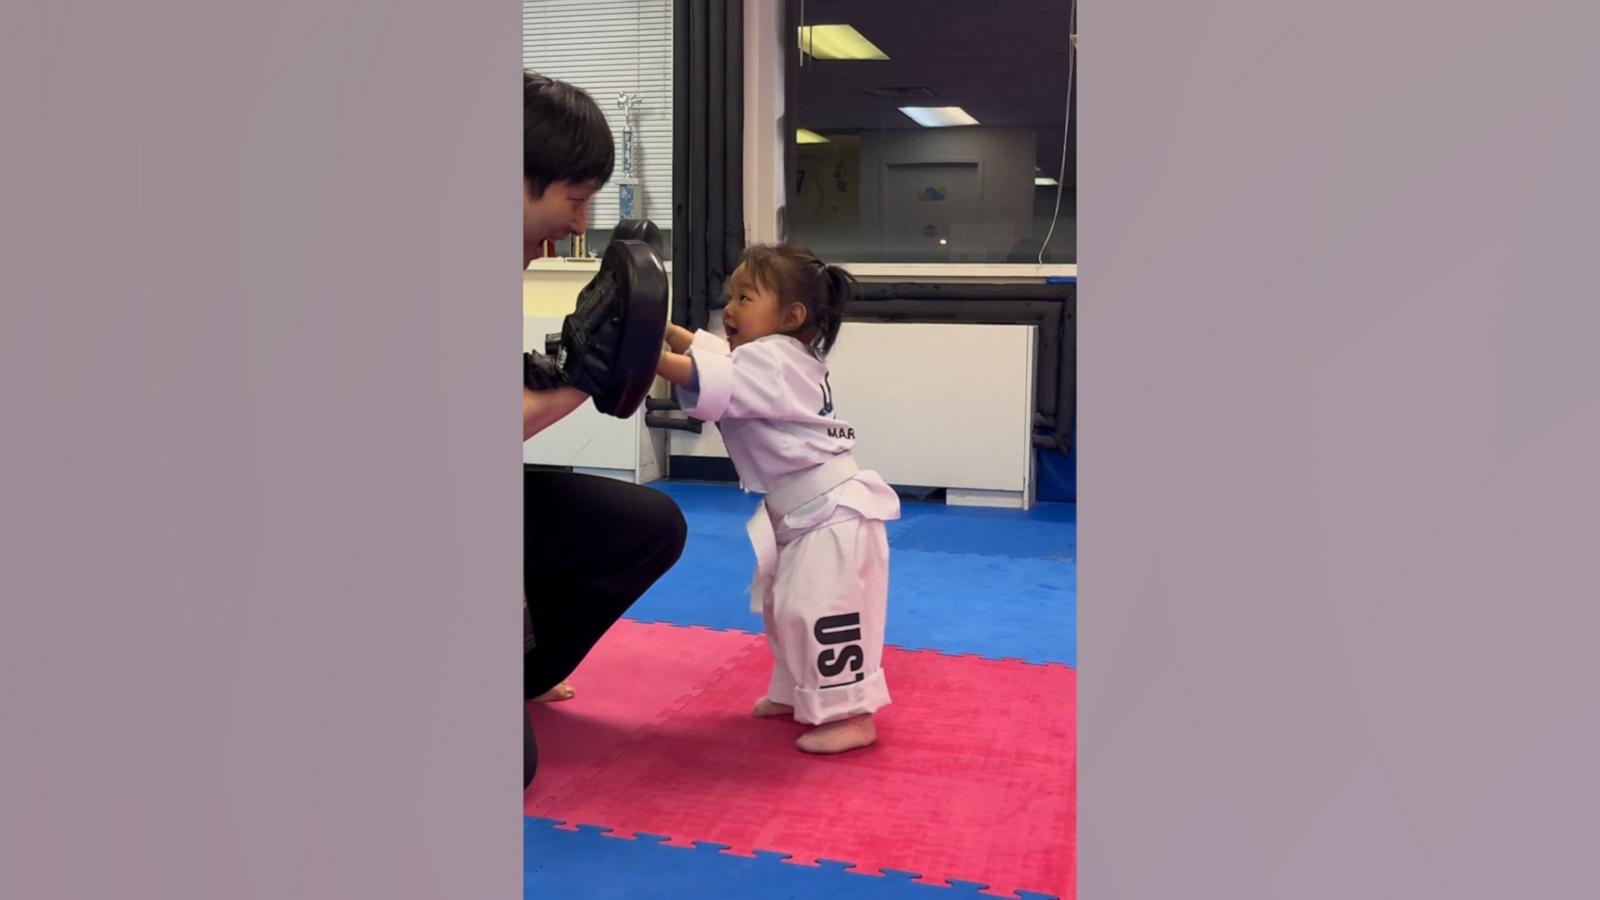 VIDEO: Toddler learns taekwondo from dad in adorable training sessions